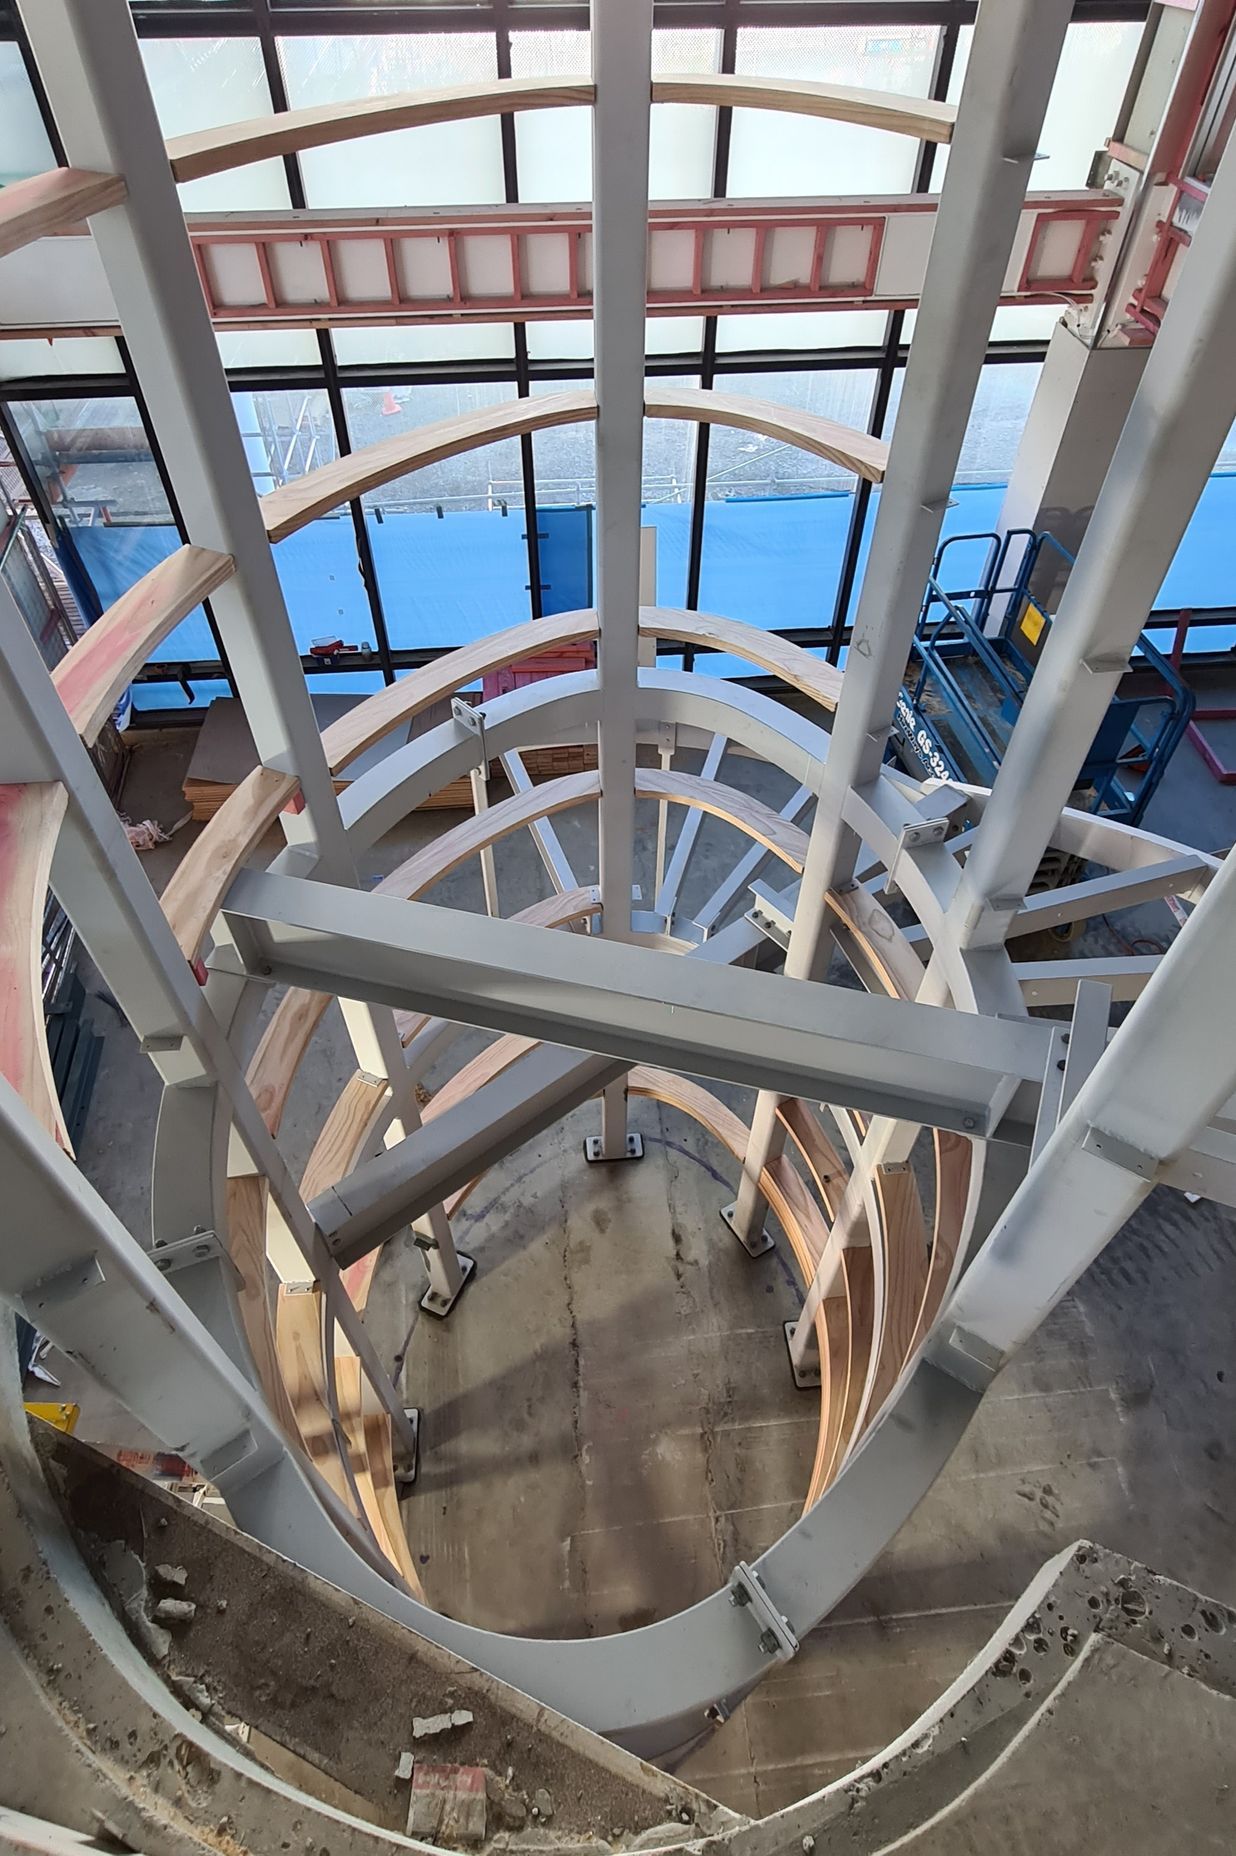 Wellington Childrens Hospital Feature Staircase